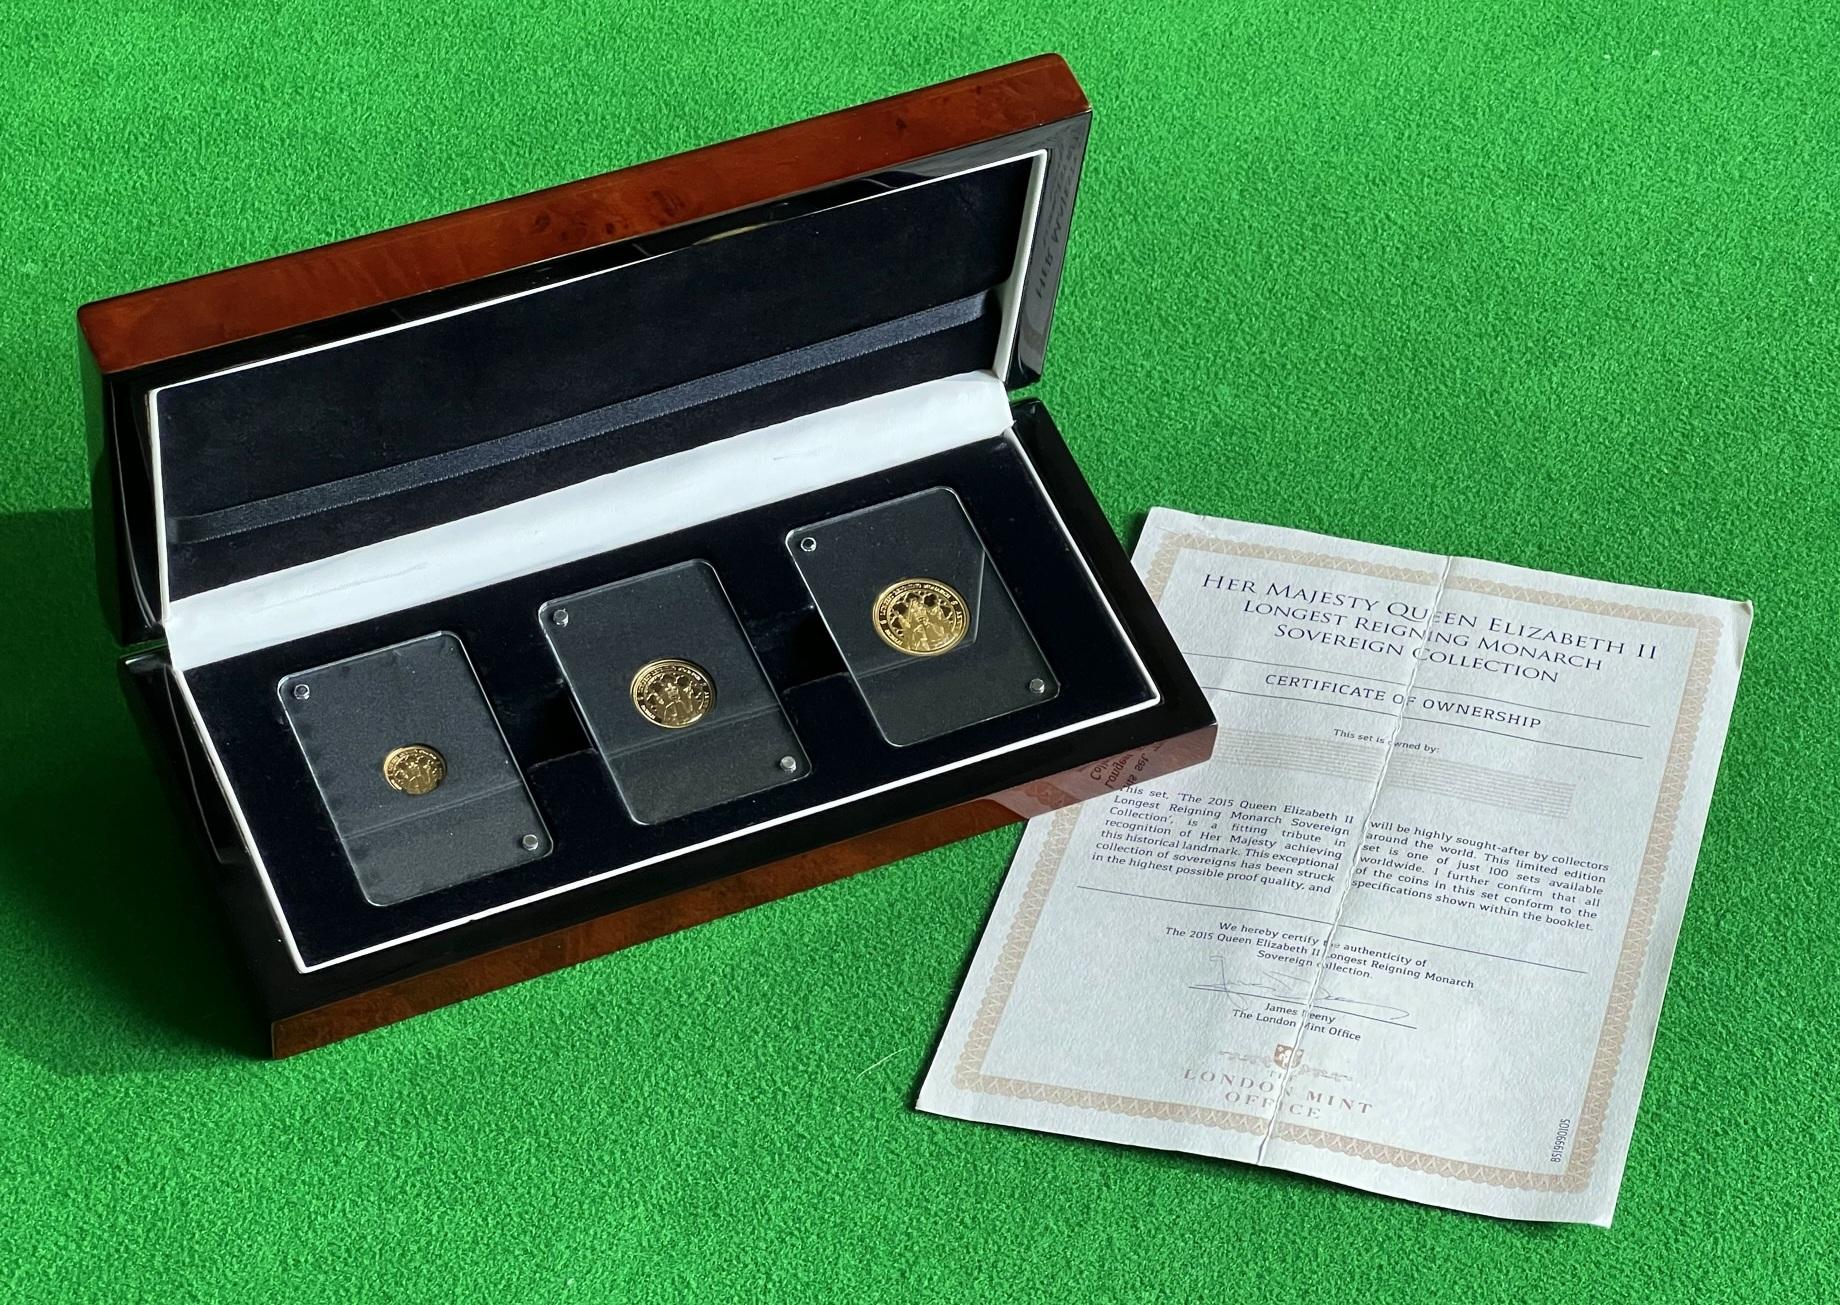 We are delighted to offer for sale this new in the box with original presentation cases, Limited Edition of 100 suite of three 22ct solid gold sovereigns titled “HER MAJESTY QUEEN ELIZABETH II LONGEST REIGNING MONARCH SOVEREIGN COLLECTION”

This